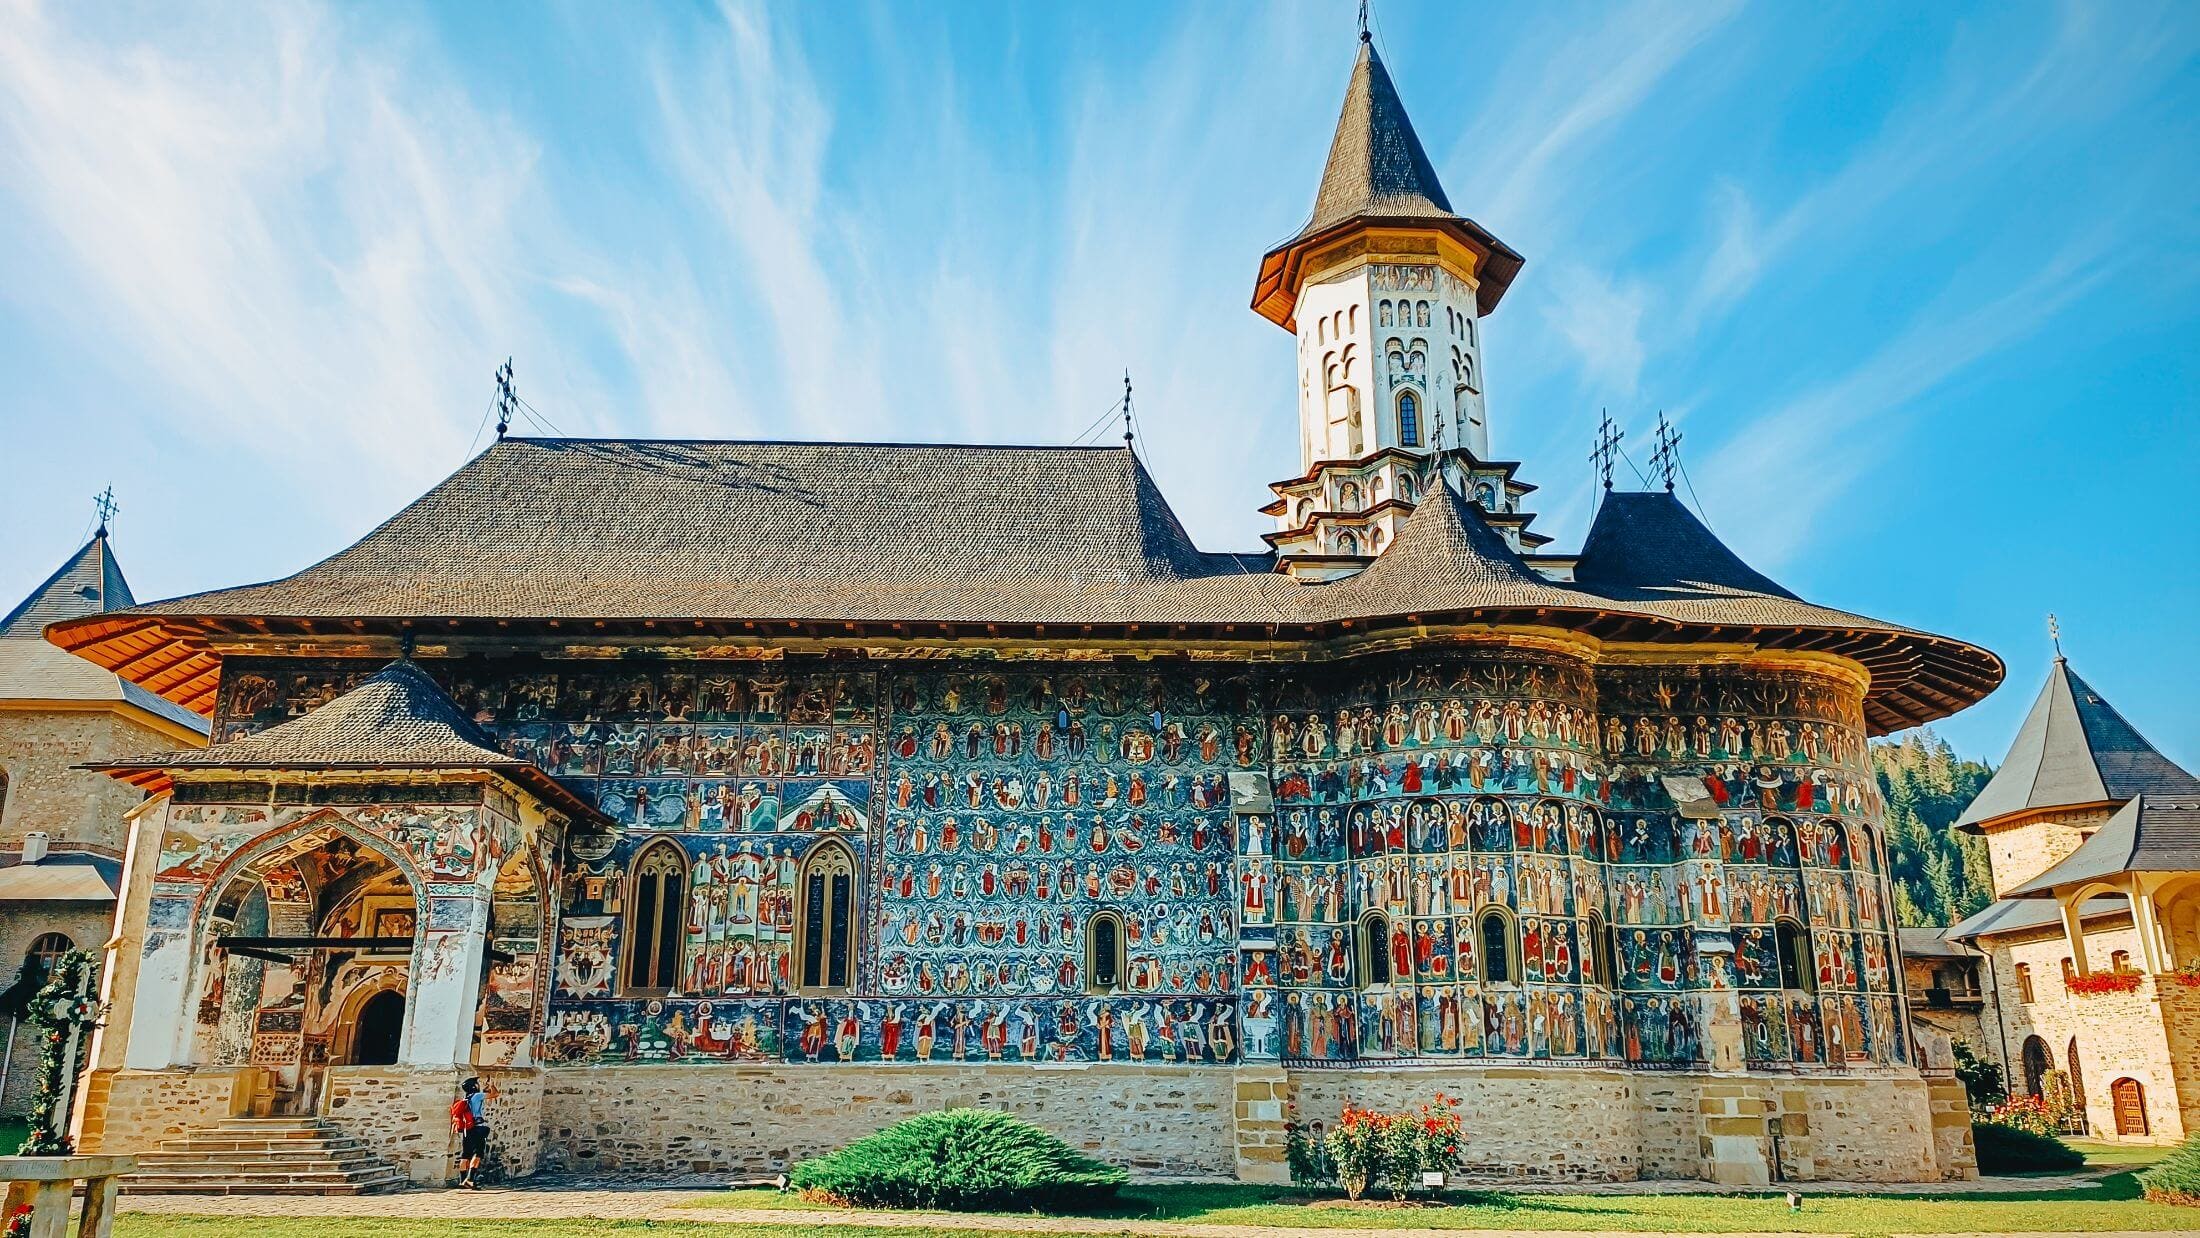 The painted monastery at Sucevita, as seen by Slow Cyclists on Romania's Via Transilvanica